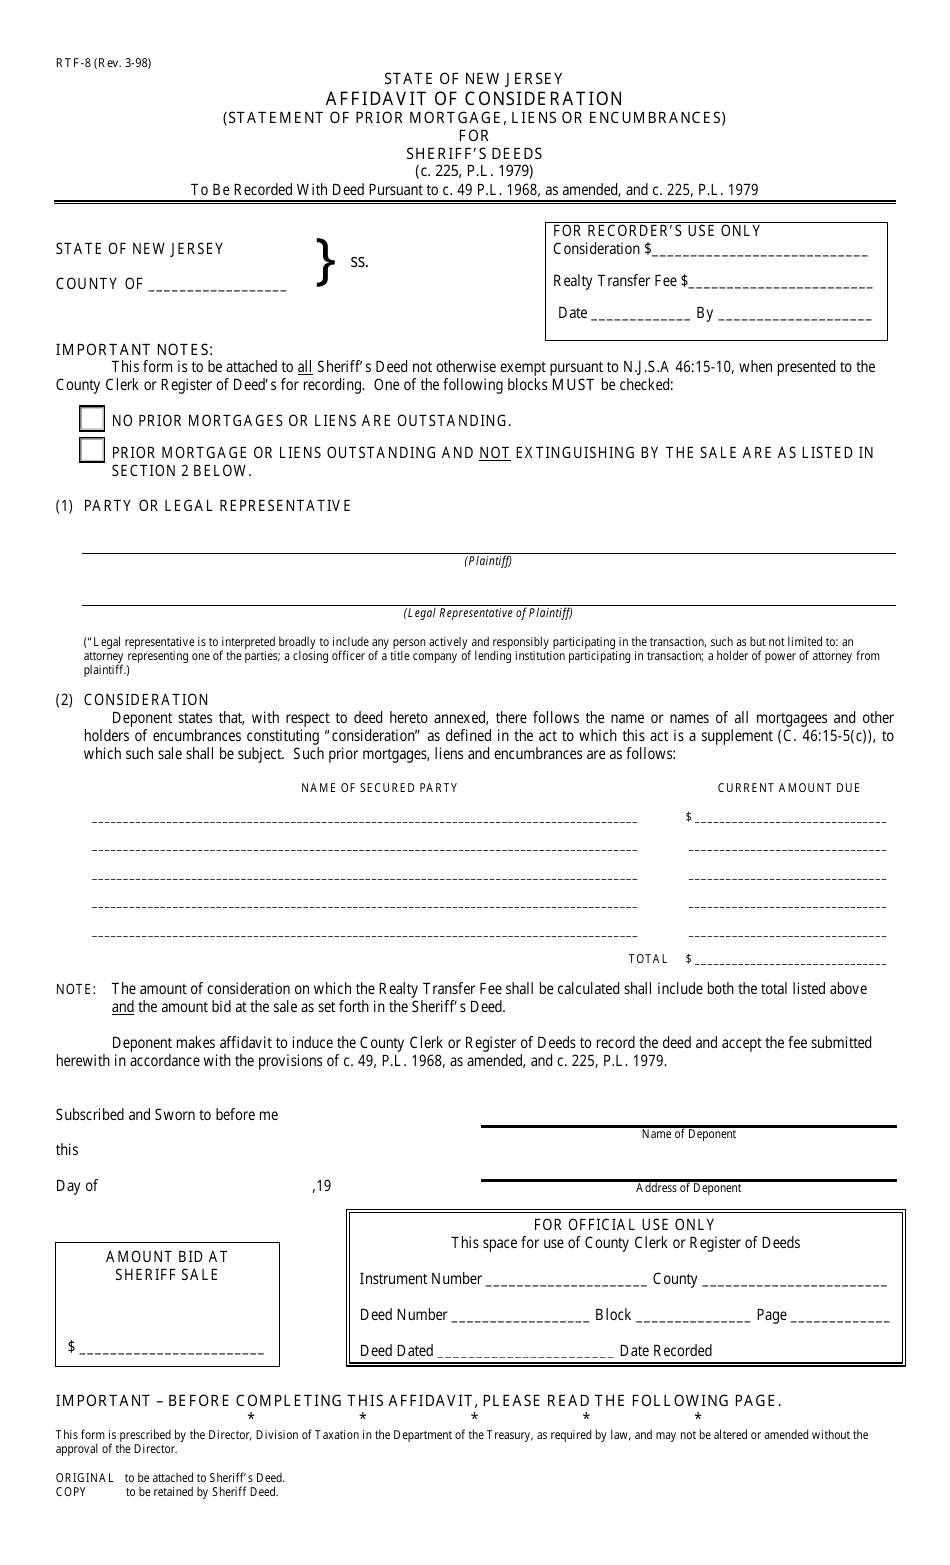 Form RTF-8 Affidavit of Consideration (Statement of Prior Mortgage, Liens or Encumbrances) for Sheriffs Deeds - New Jersey, Page 1